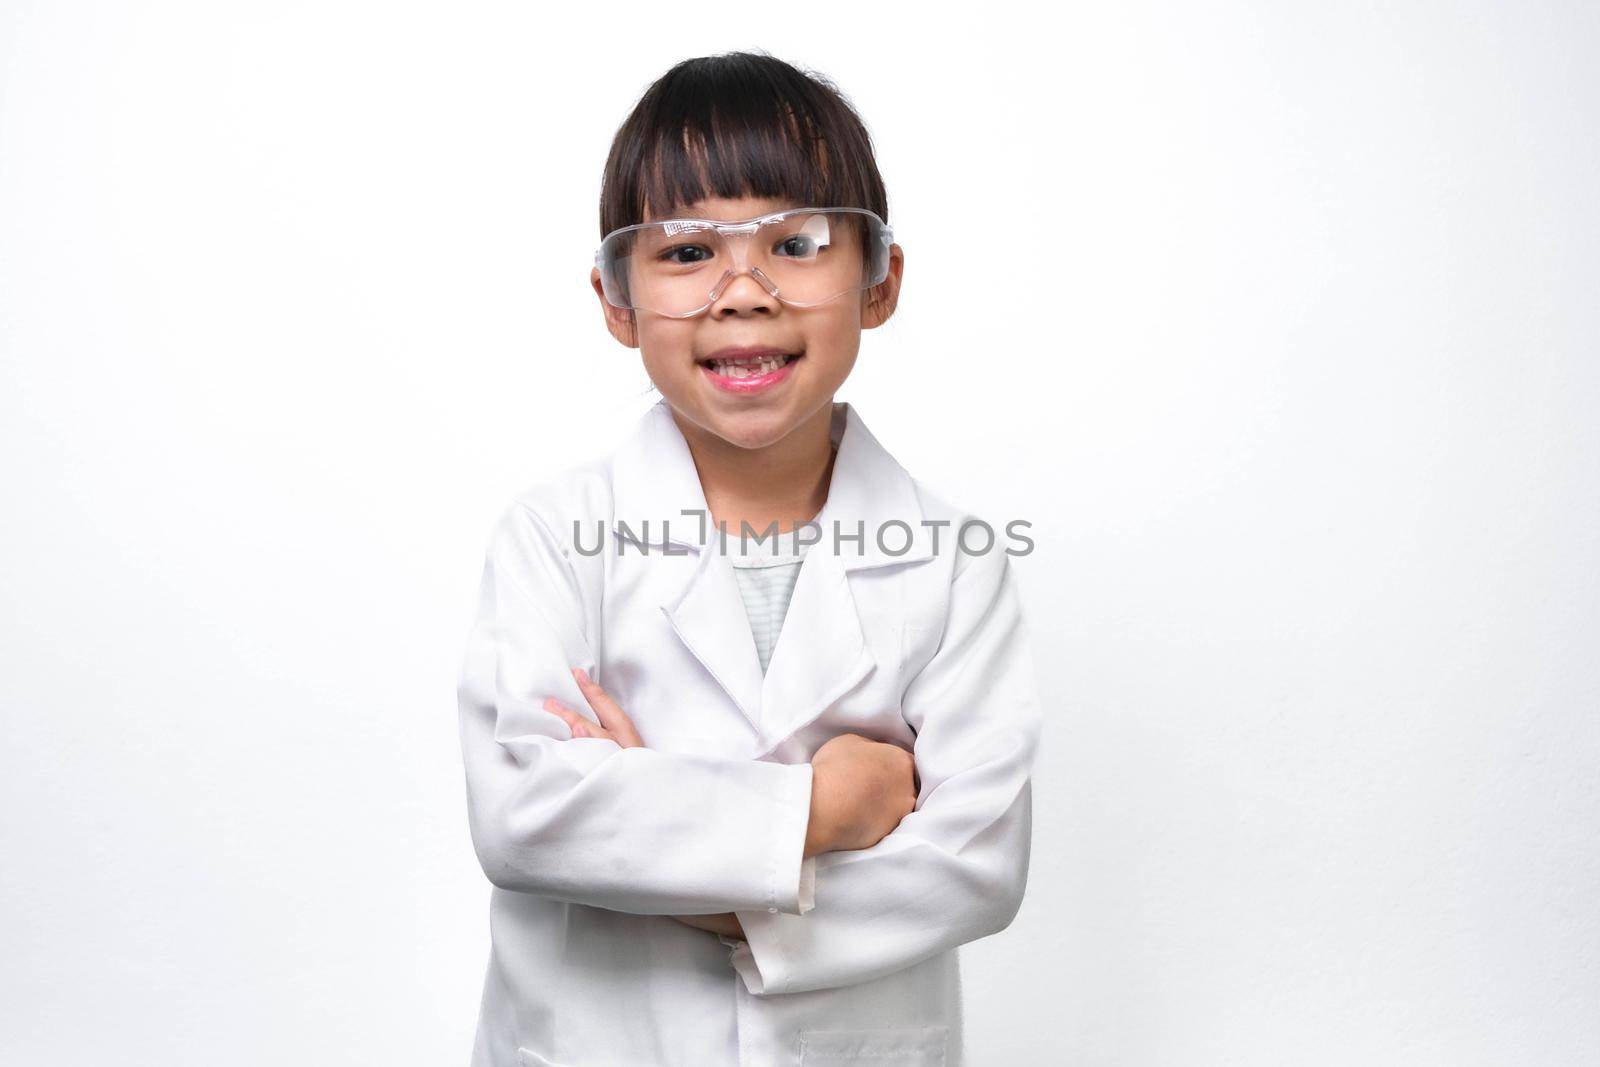 Portrait of a smiling little girl with glasses standing with her arms crossed in a doctor or science suit on a white background. Little scientist.